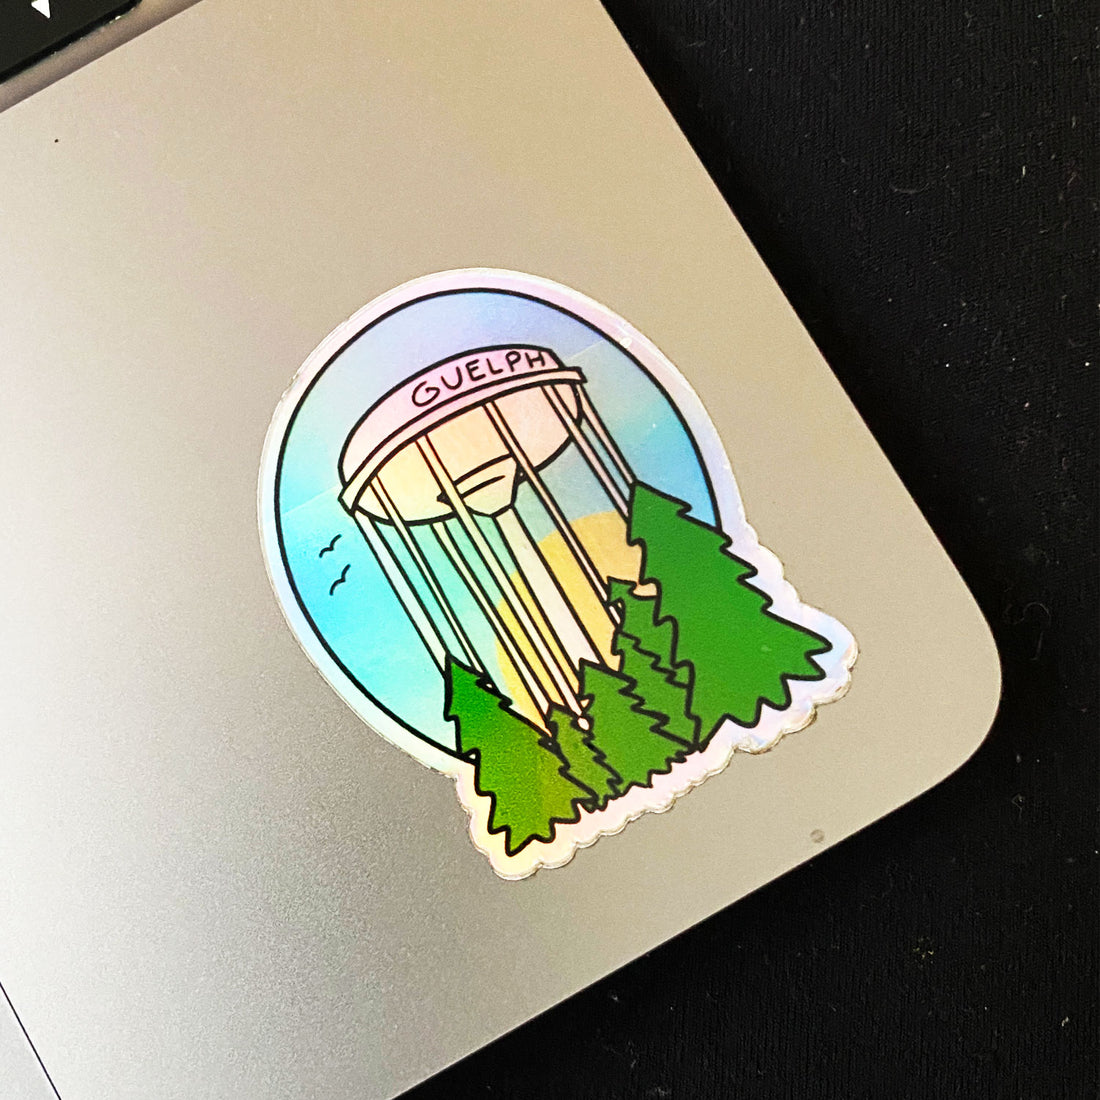 Guelph Water Tower Holographic Sticker